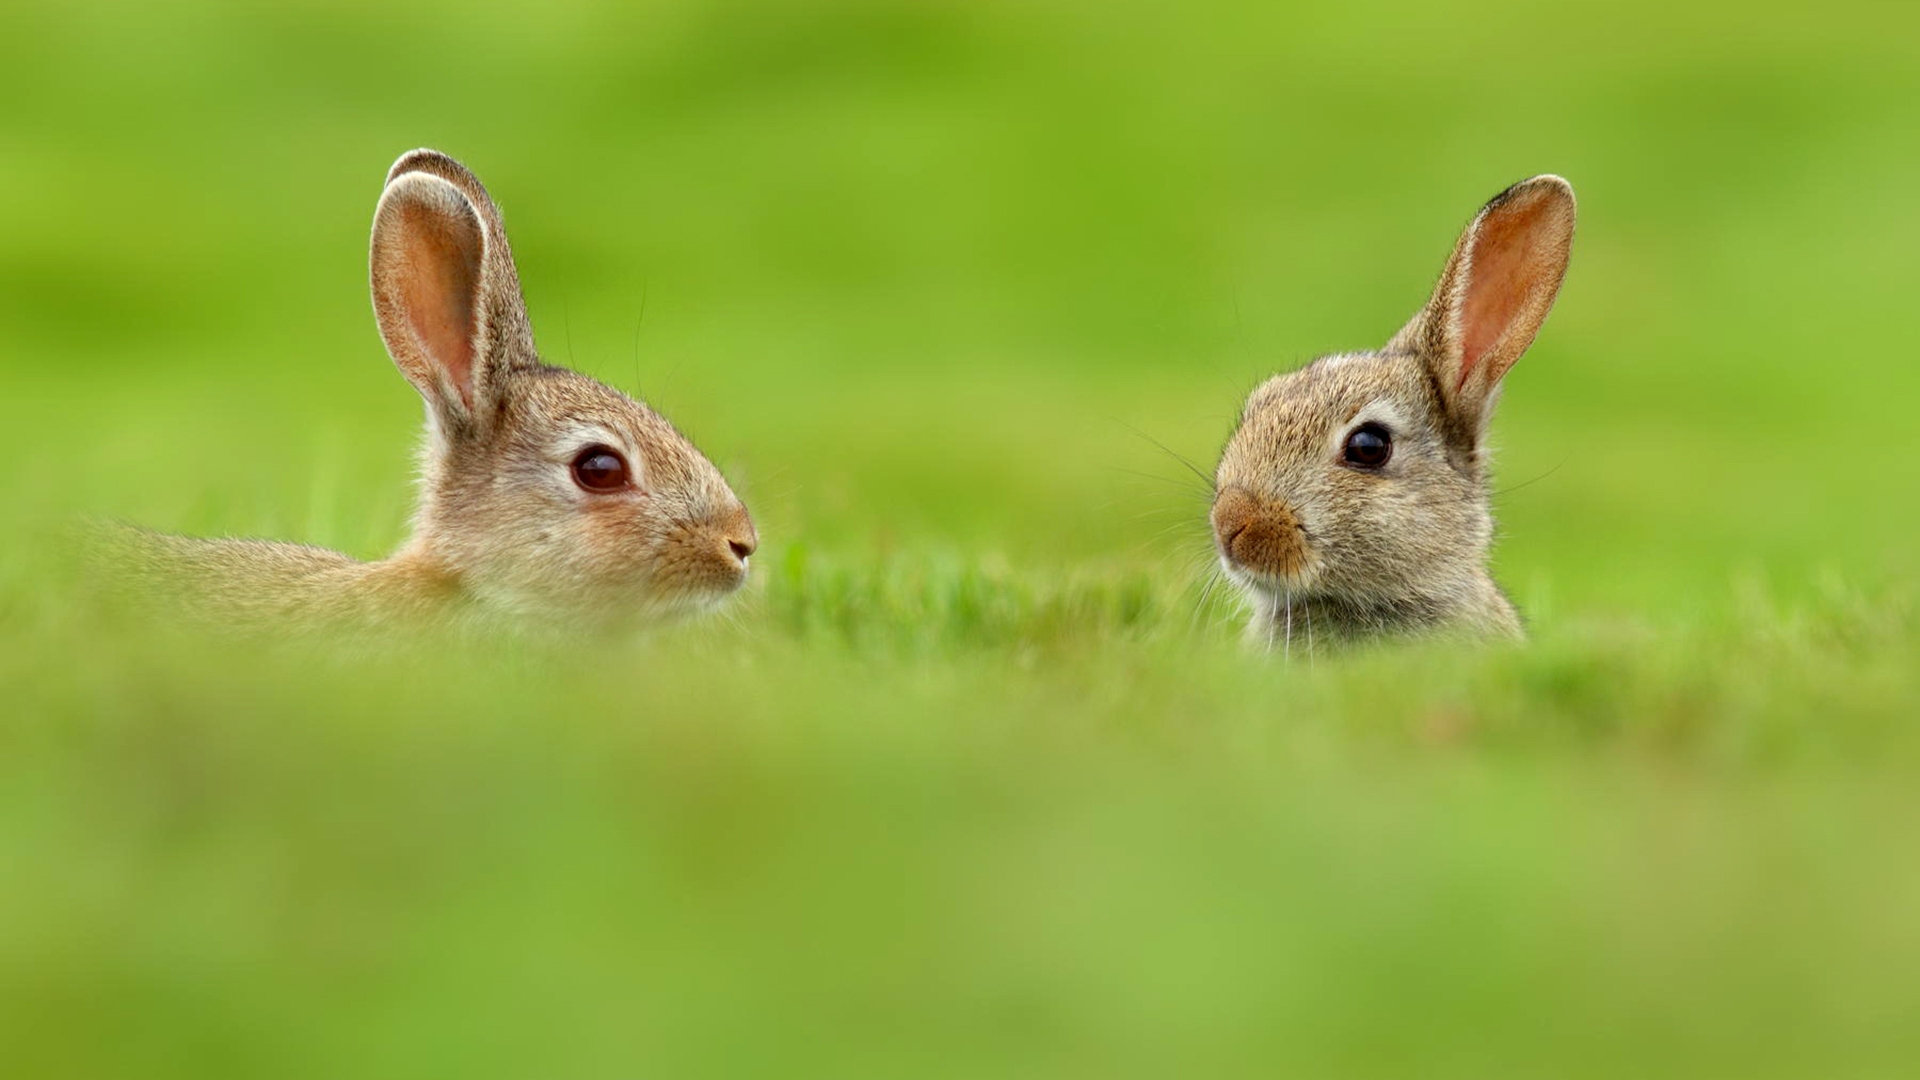 Two Cute Rabbits in Grass for 1920 x 1080 HDTV 1080p resolution